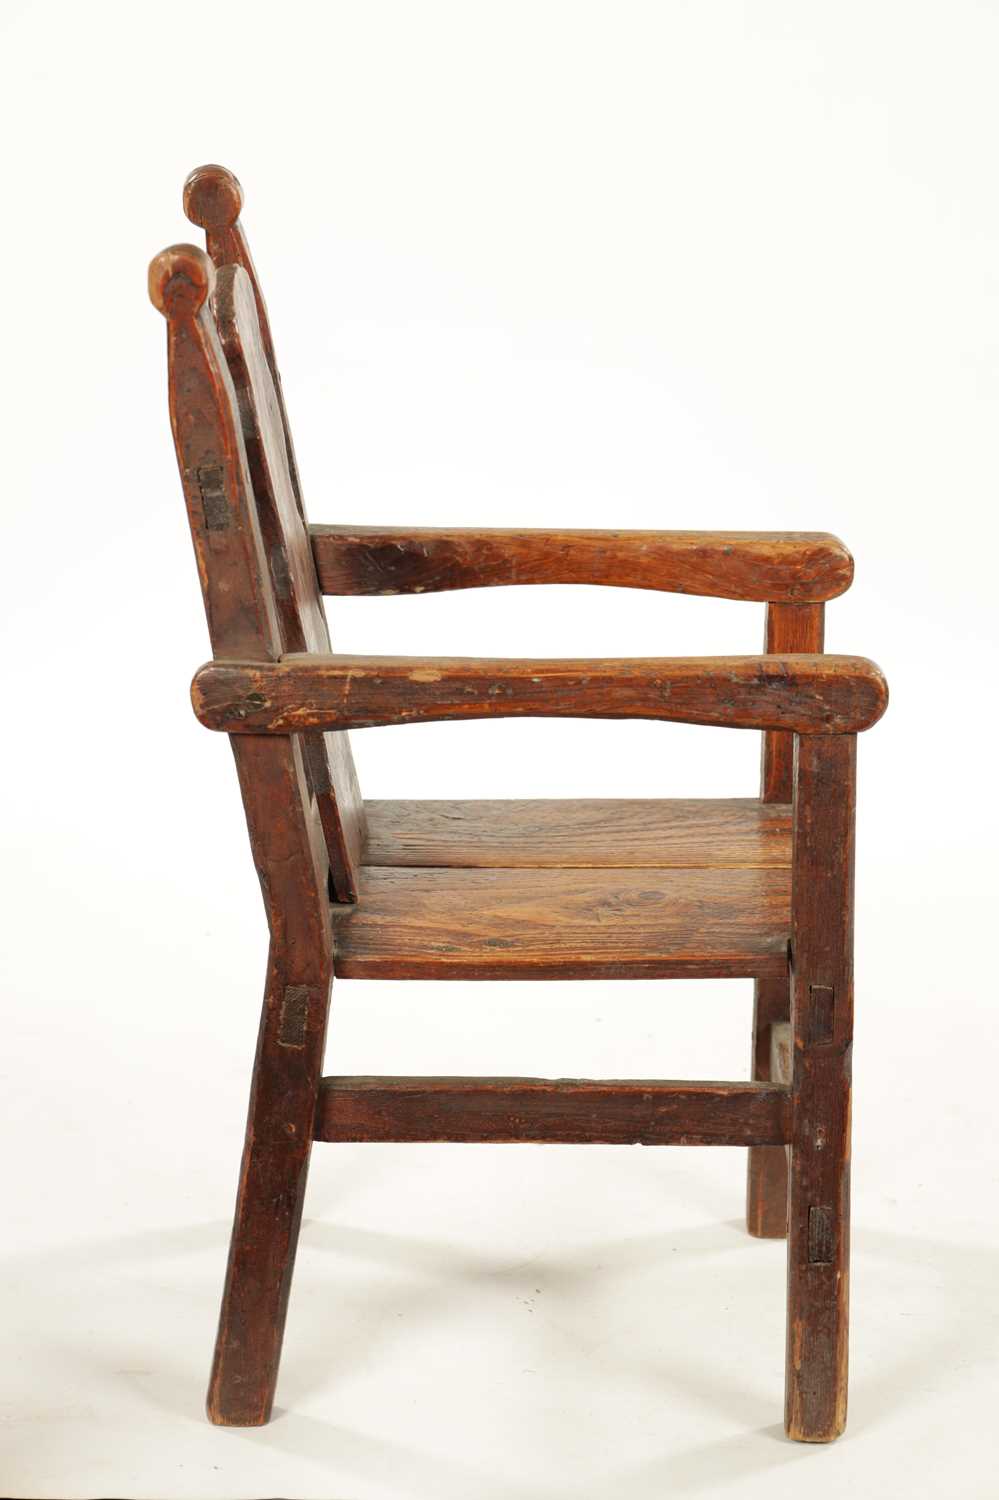 AN UNUSUAL 18TH CENTURY WELSH SCUMBLED PINE CHILD’S CHAIR - Image 4 of 5